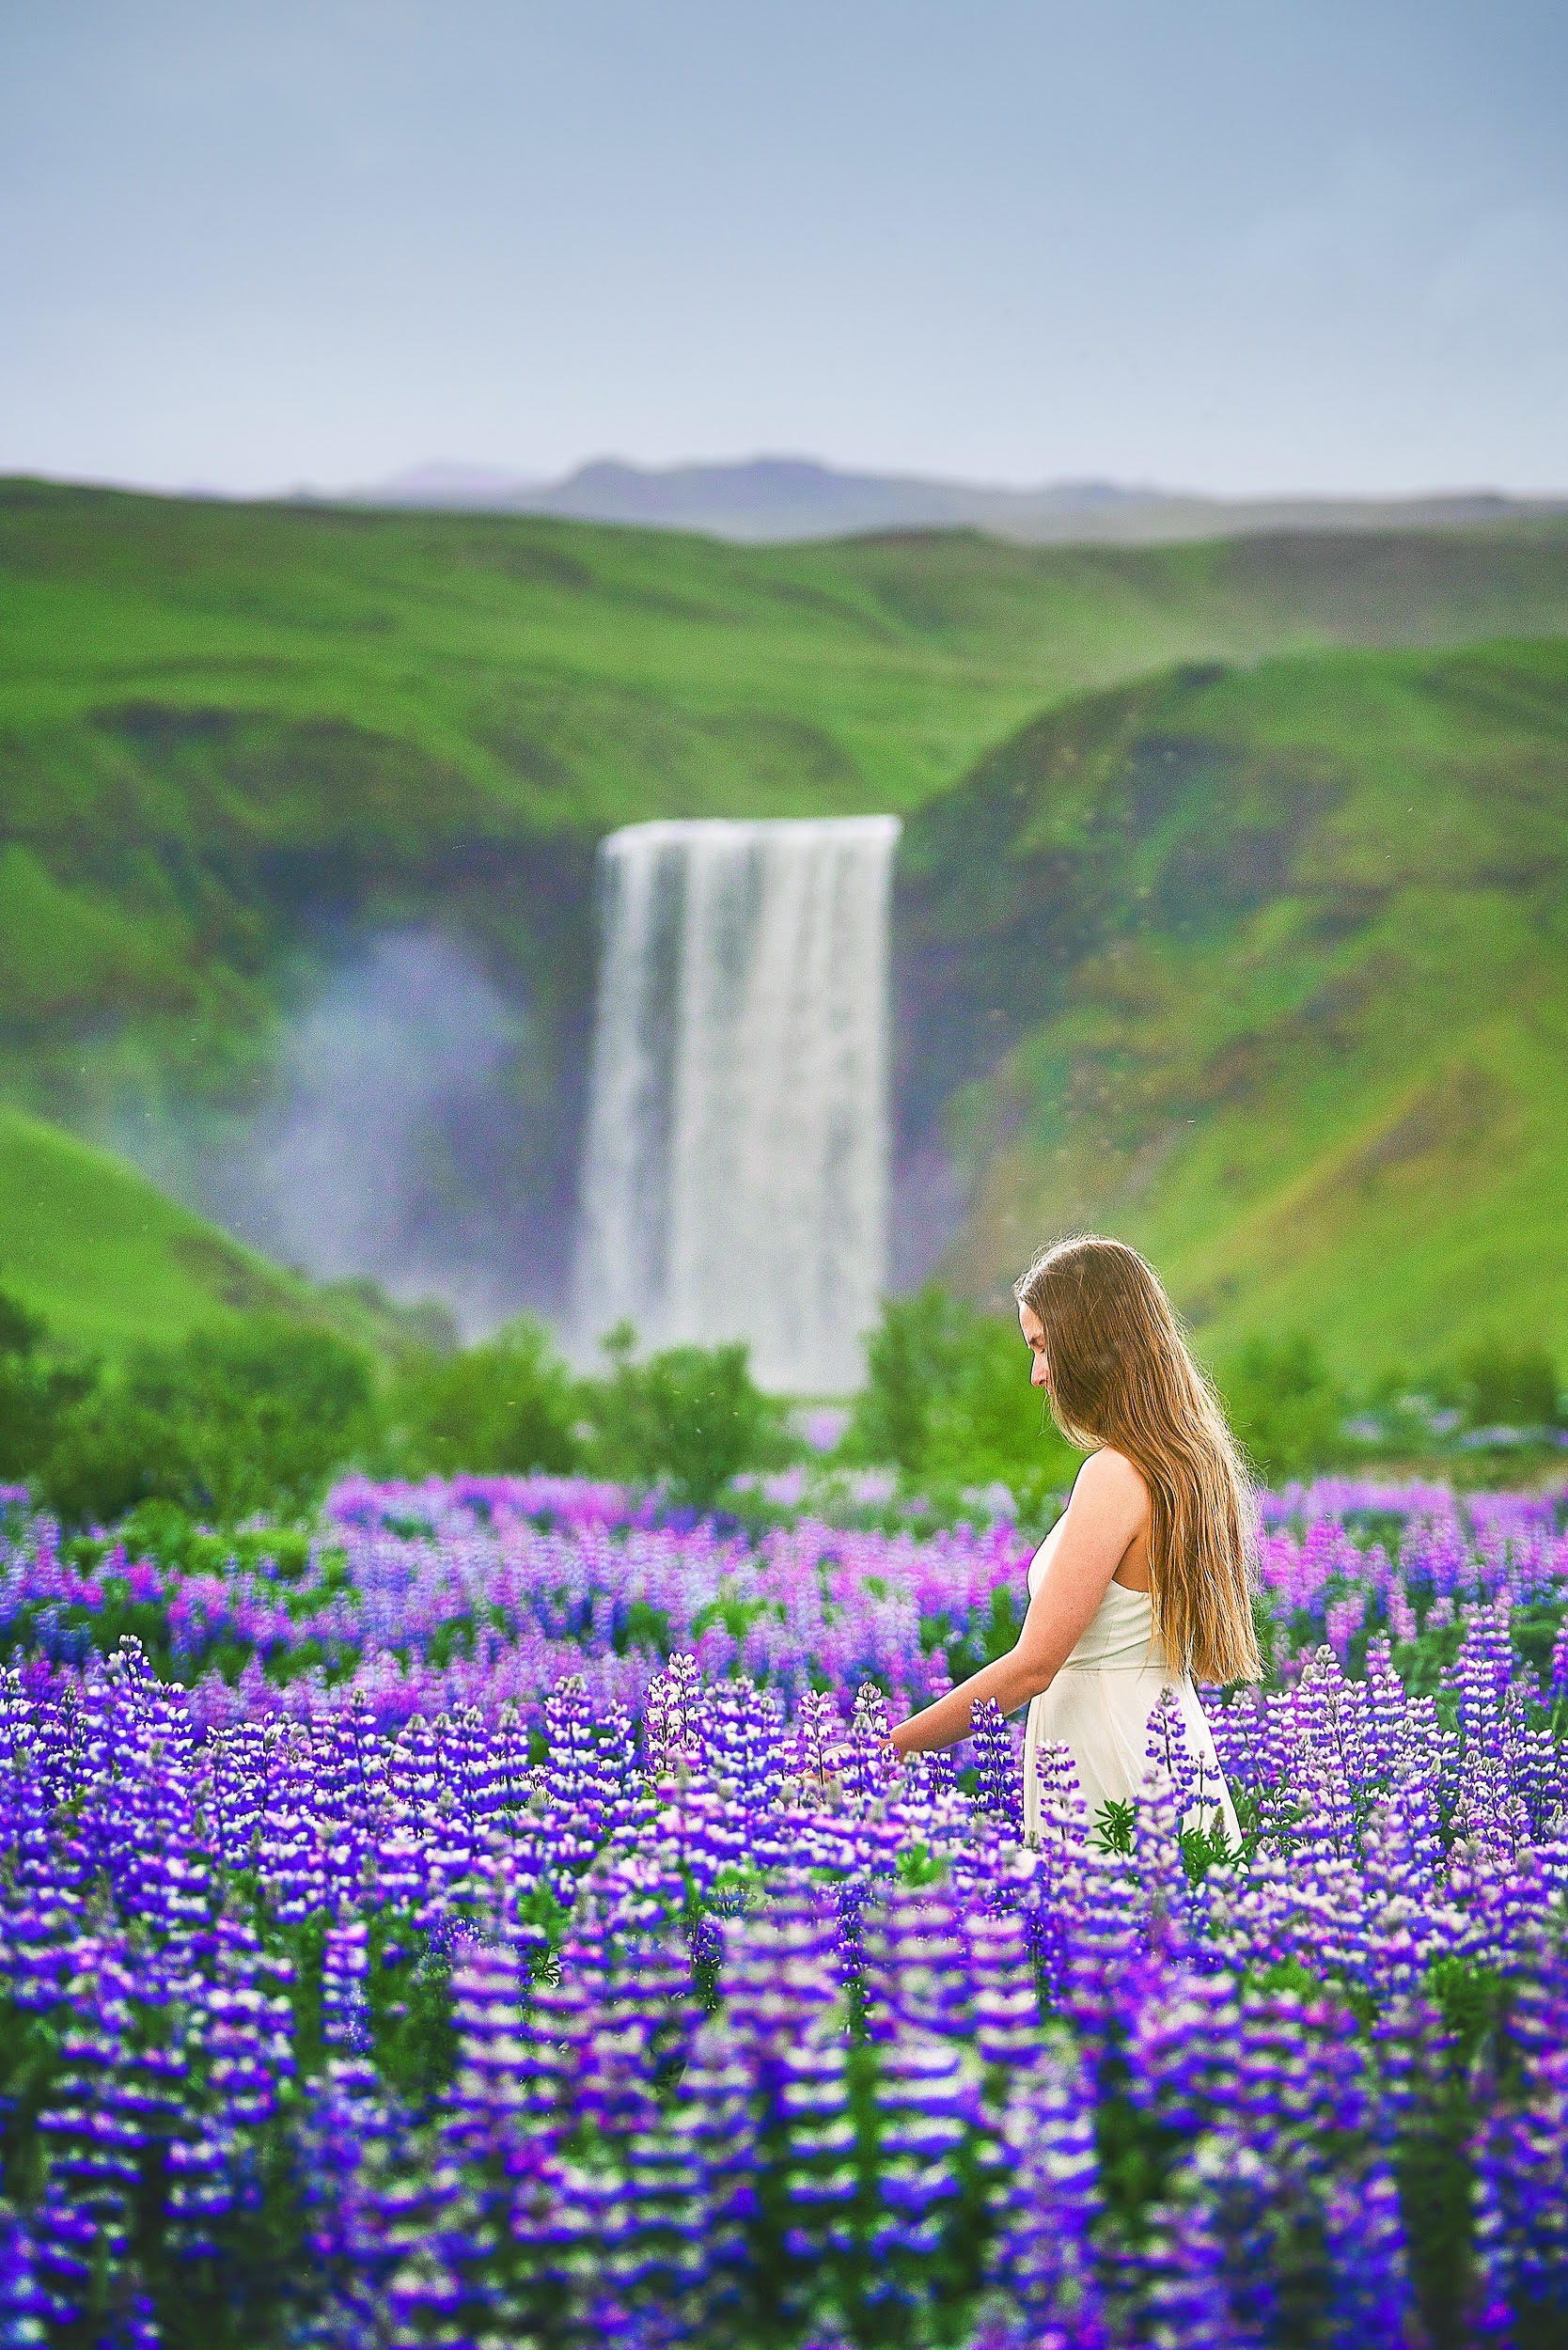 woman standing among purple lupine flowers in inceland with a waterfall in the background showing summer is the best time to visit Europe